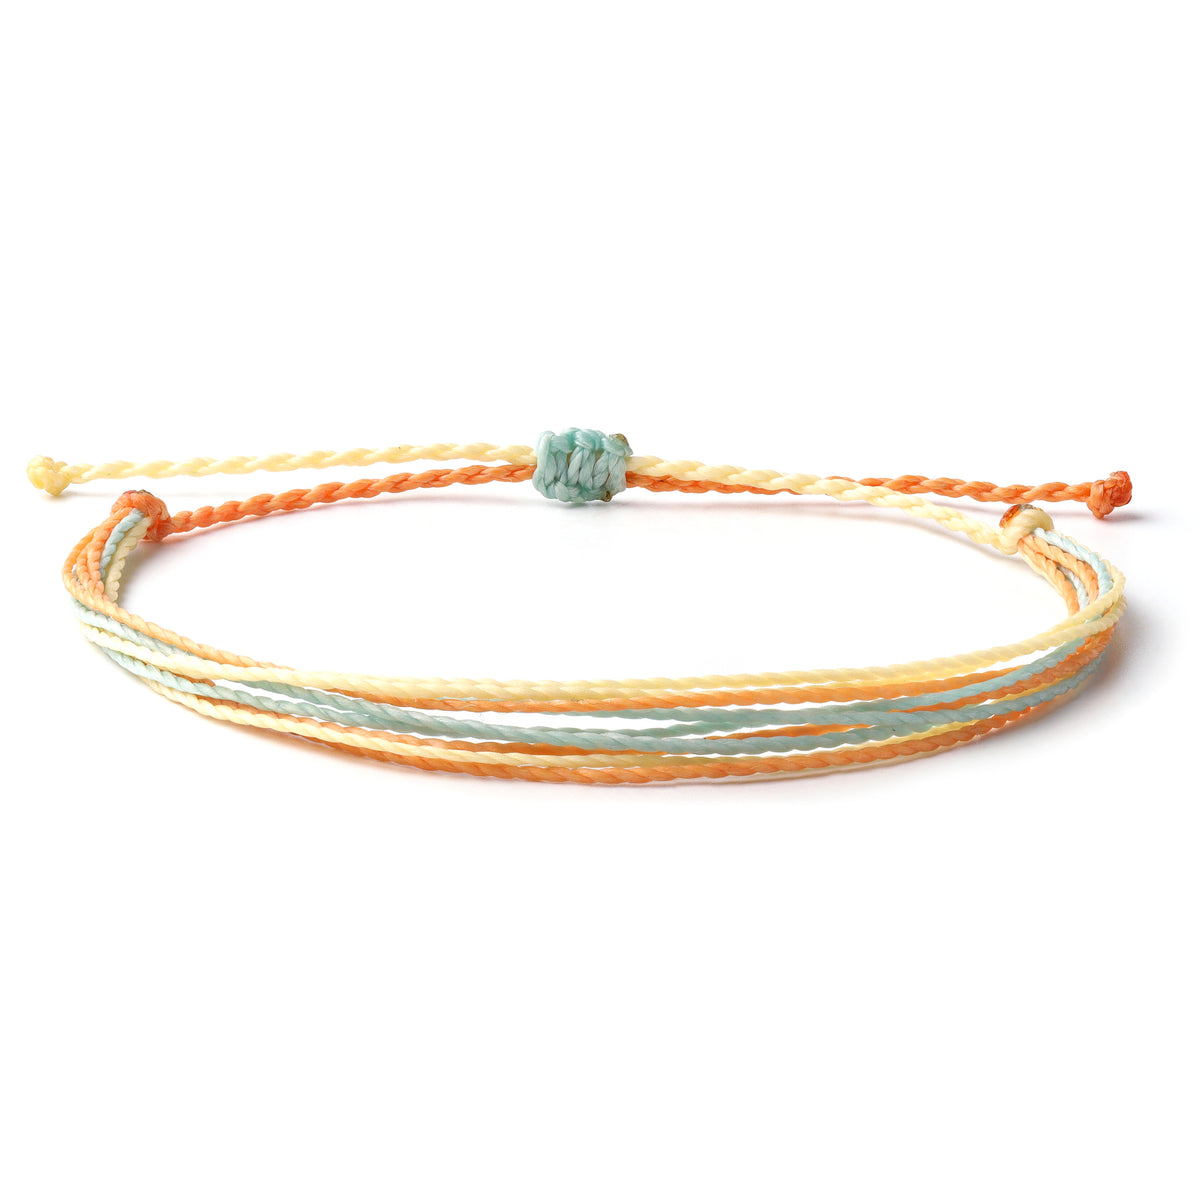 Adjustable Turquoise and Cream Colored String Bracelet- ! | Aesthetic Ocean Themed Water Resistant Bracelet